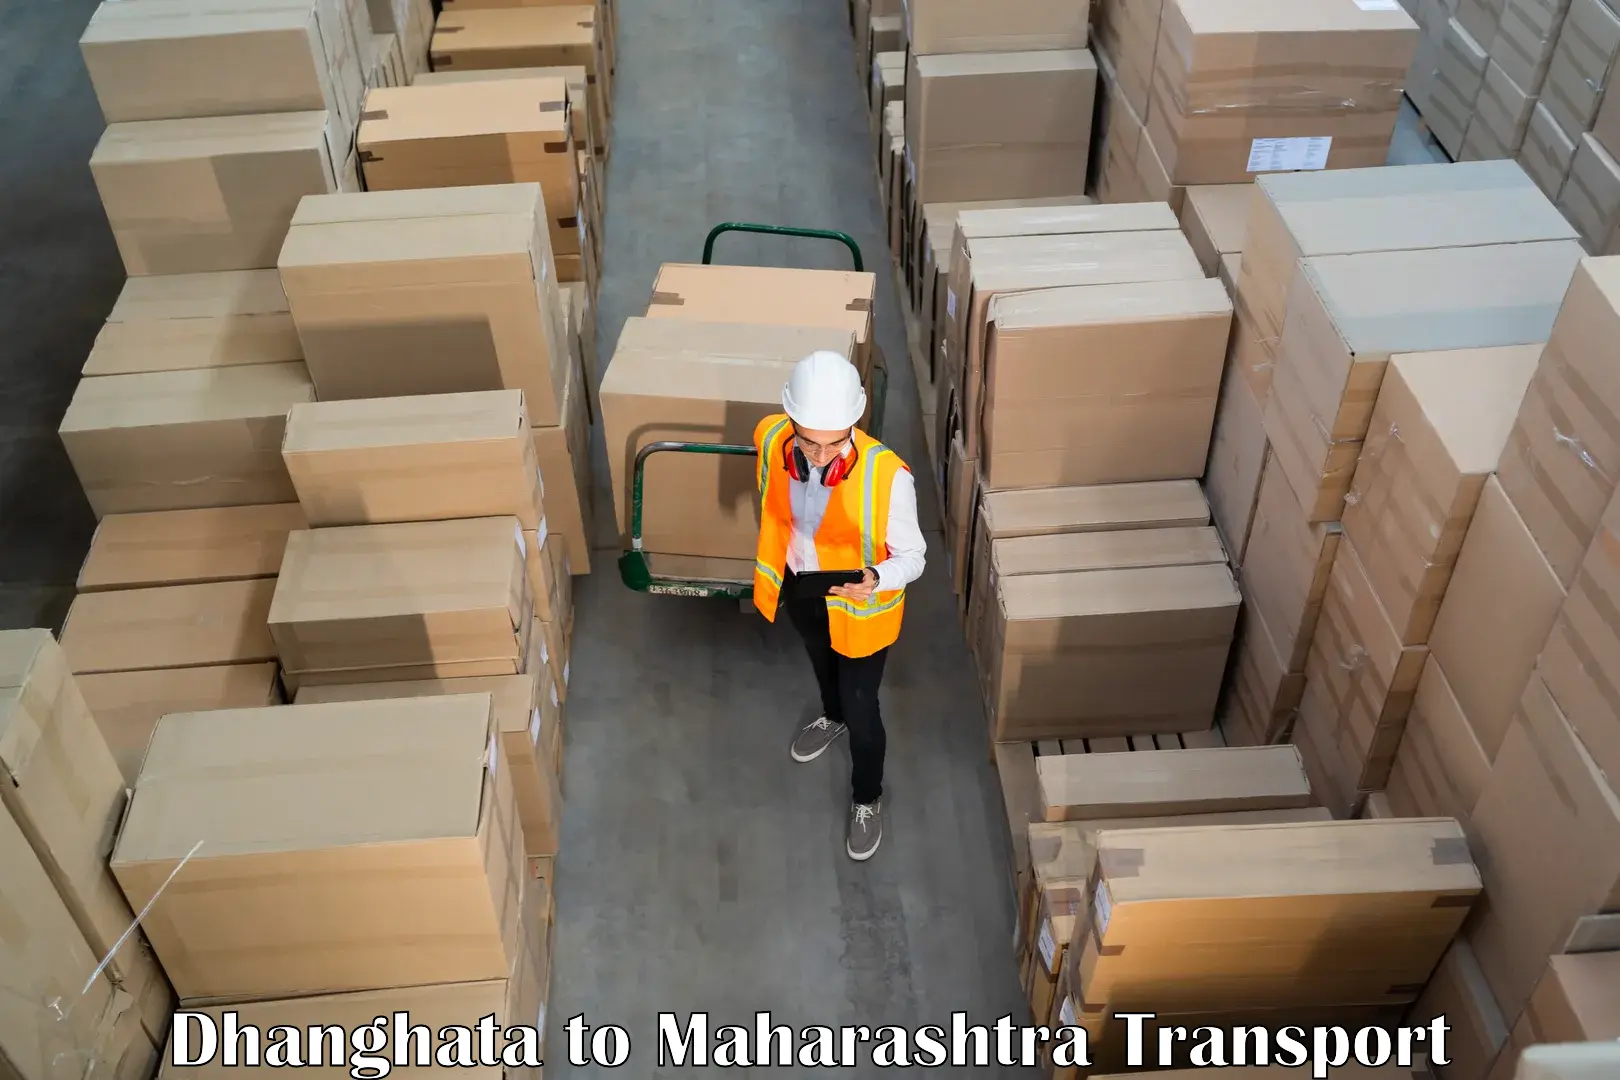 Goods delivery service Dhanghata to Wardha